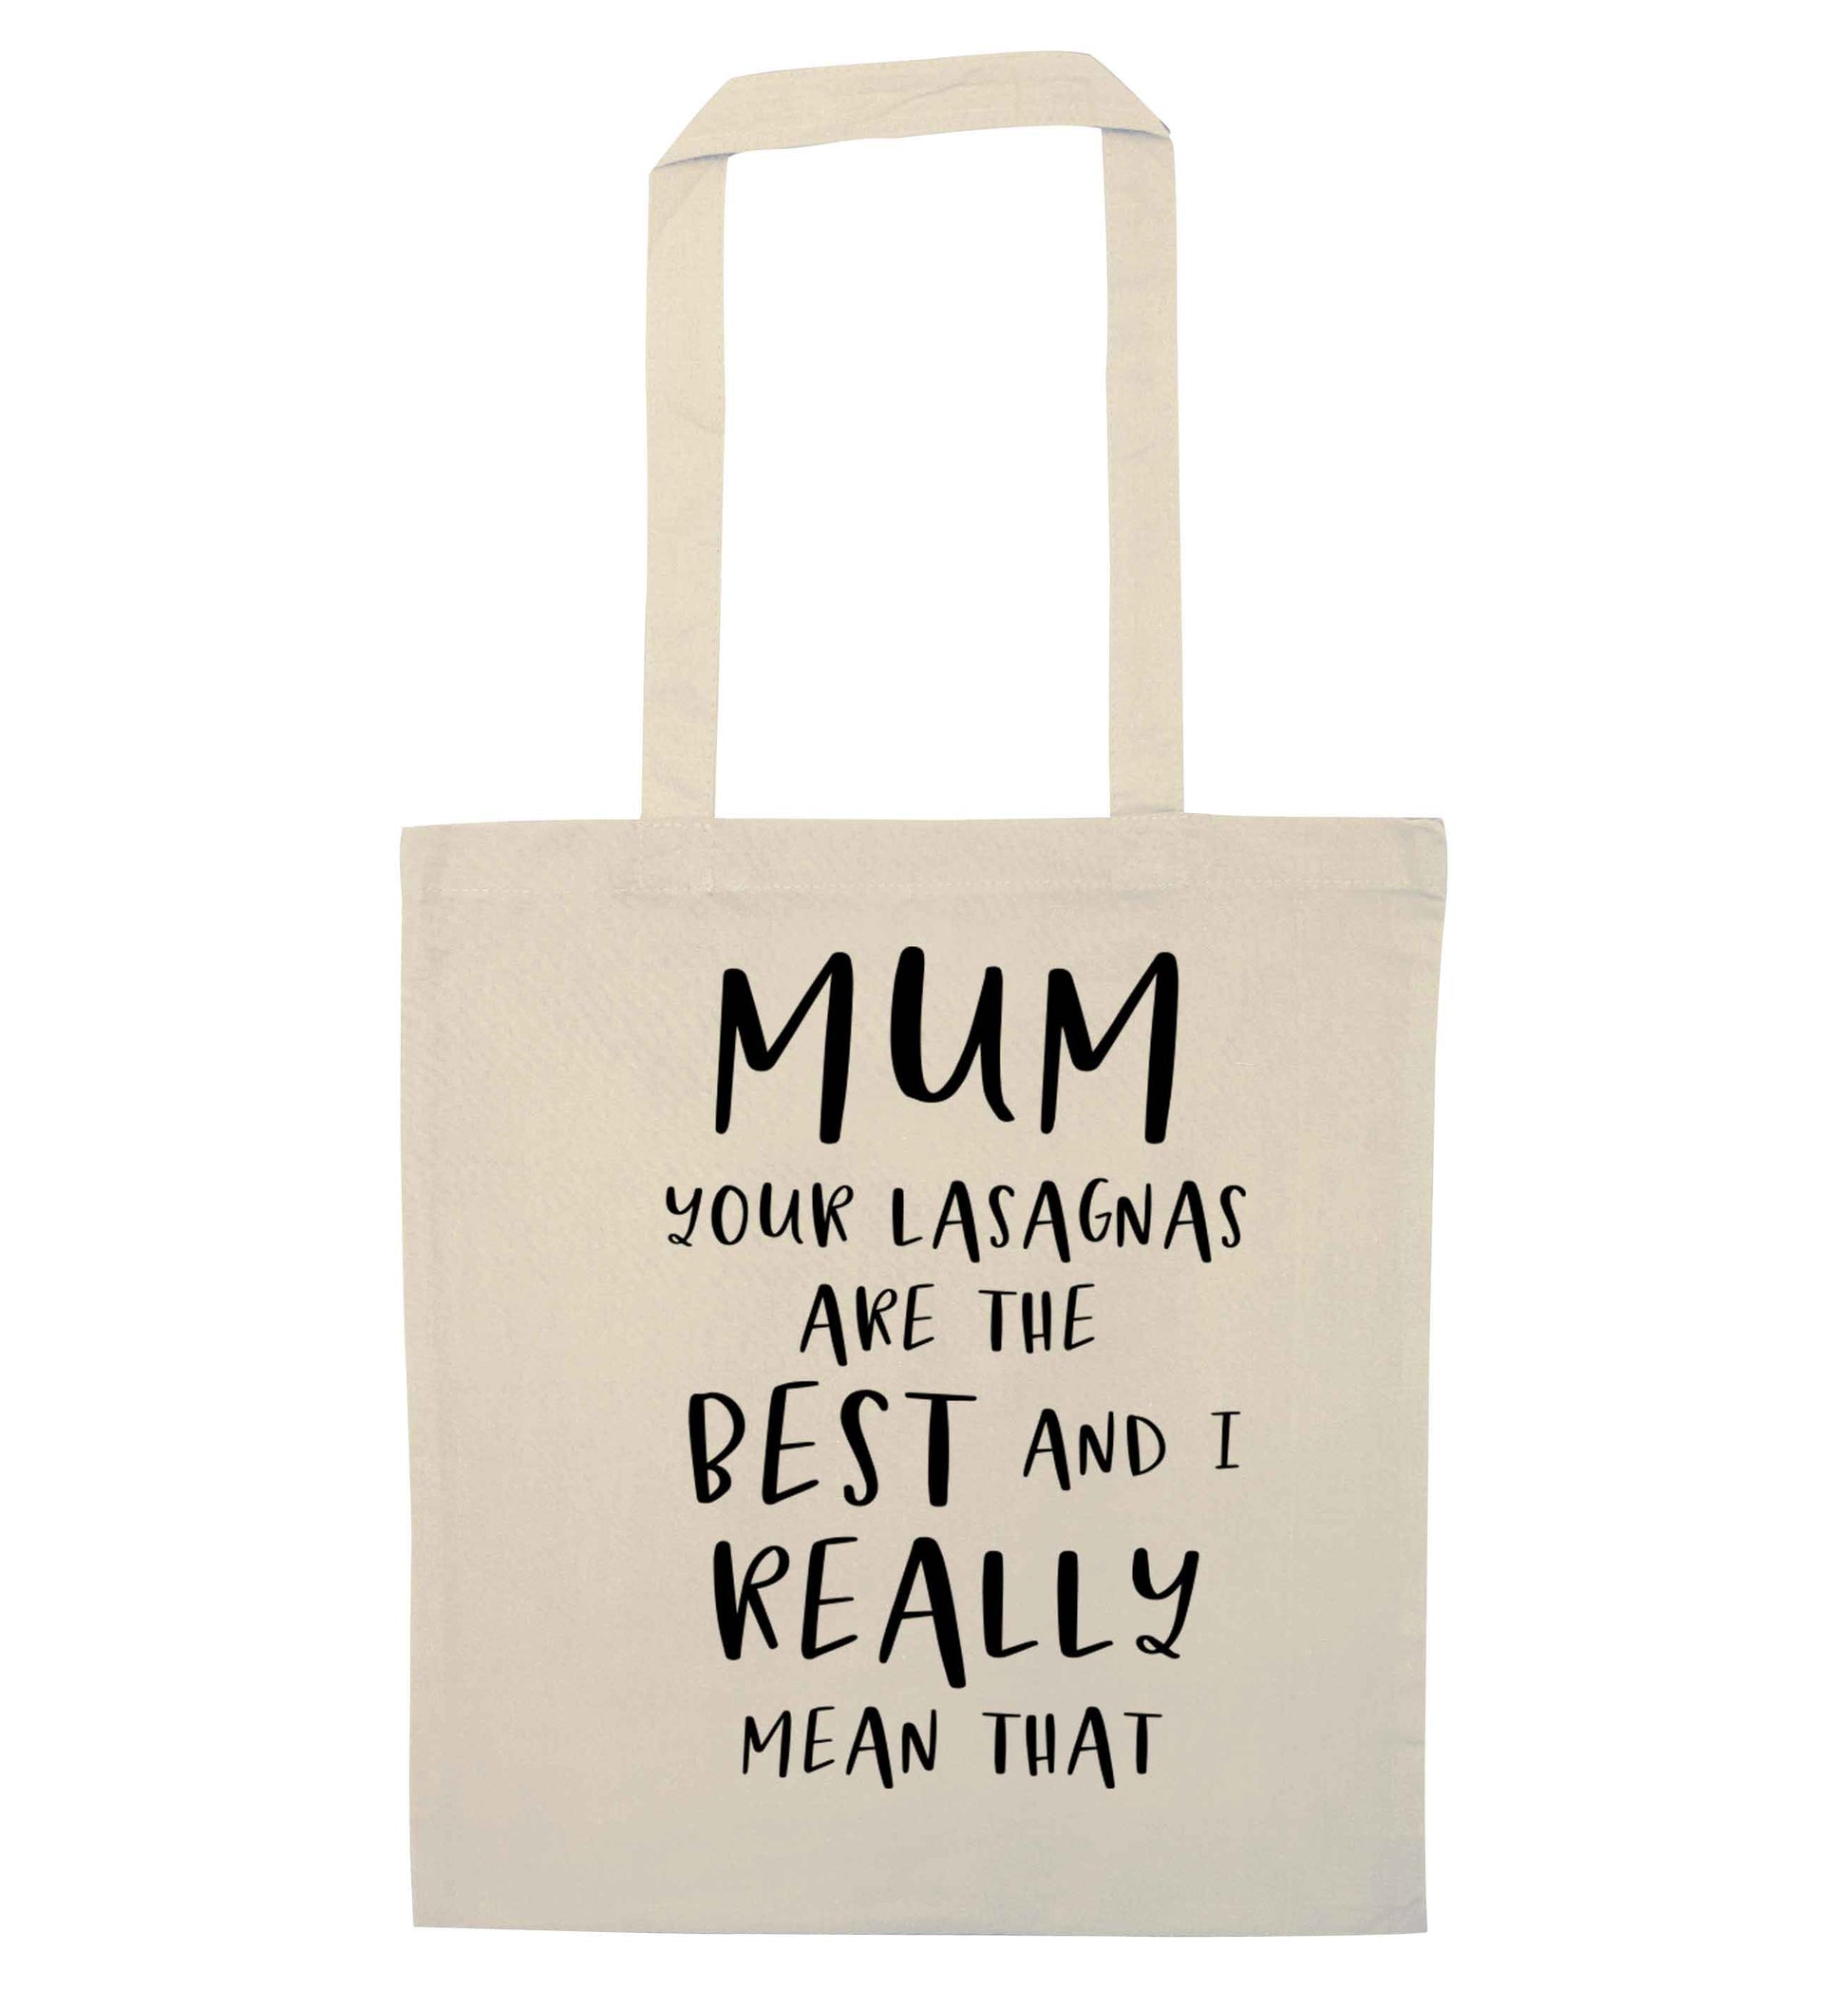 Funny gifts for your mum on mother's dayor her birthday! Mum your lasagnas are the best and I really mean that natural tote bag